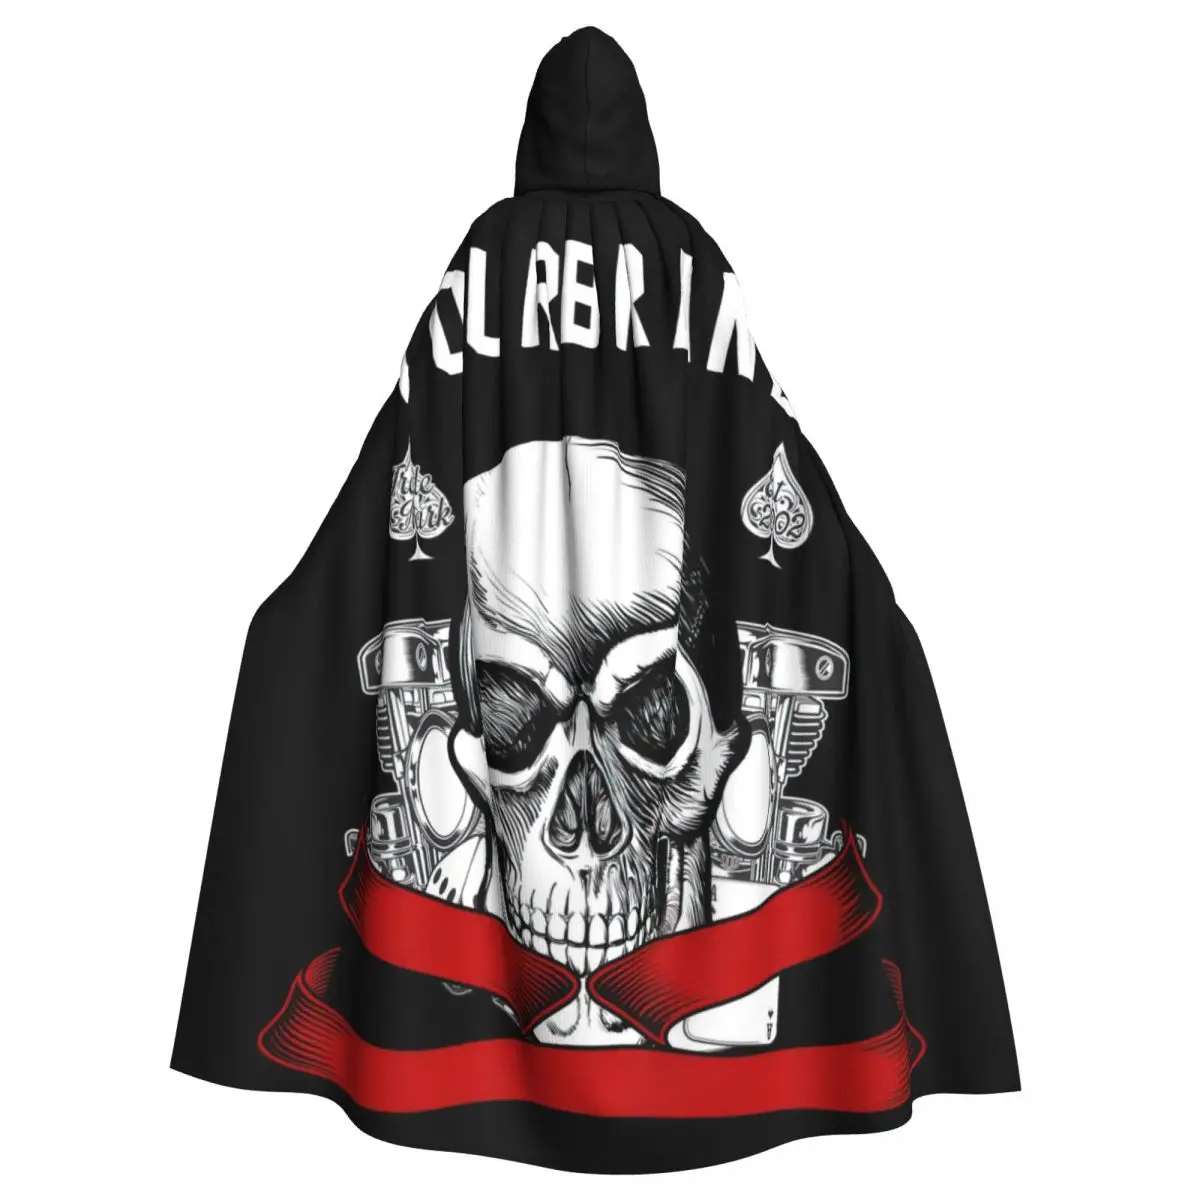 Skull With Machine Hand Drawing Vector Hooded Cloak Halloween Party Cosplay Woman Men Adult Long Witchcraft Robe Hood